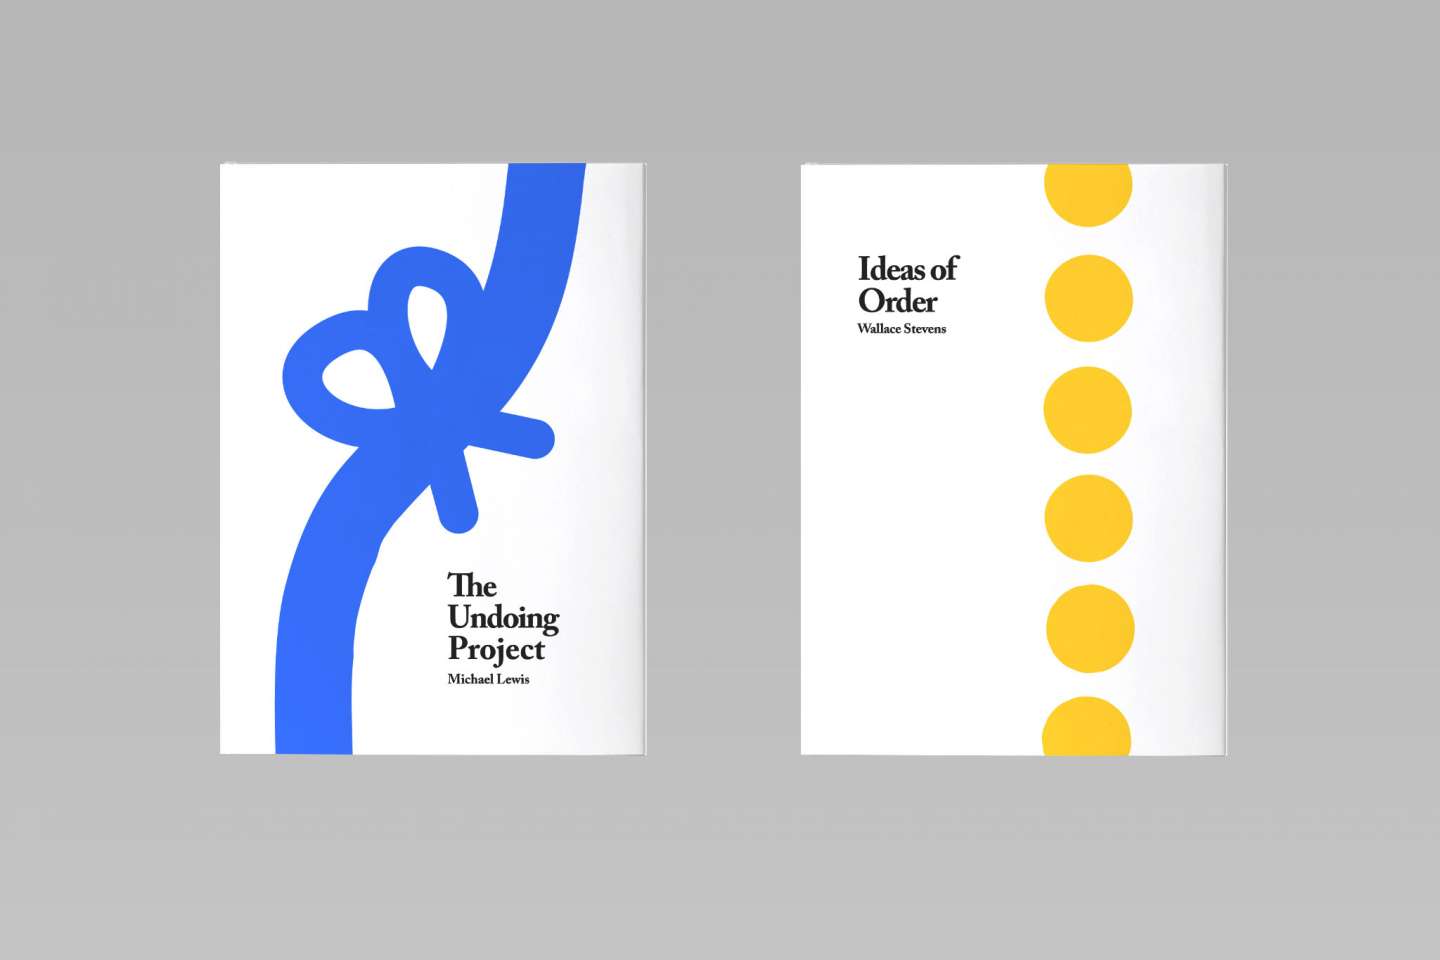 The Undoing Project / Ideas of Order Book Covers